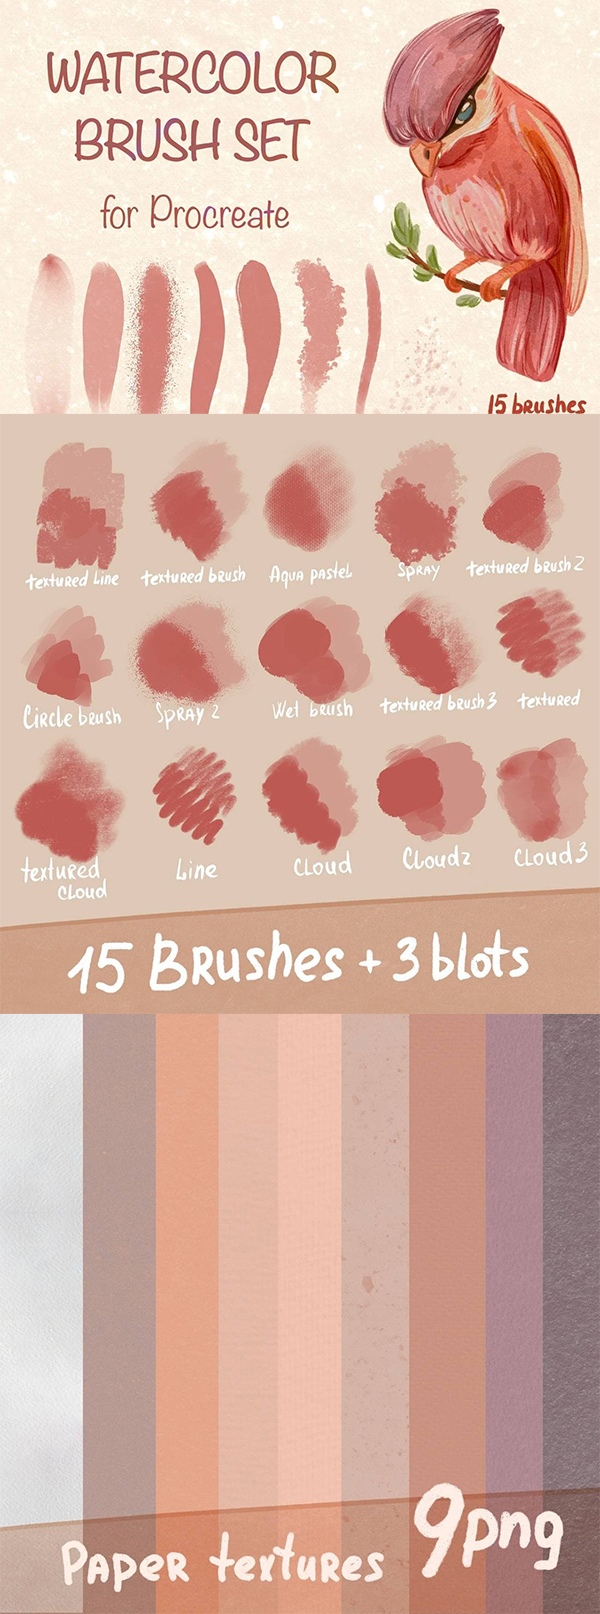 Watercolor brushes for Procreate